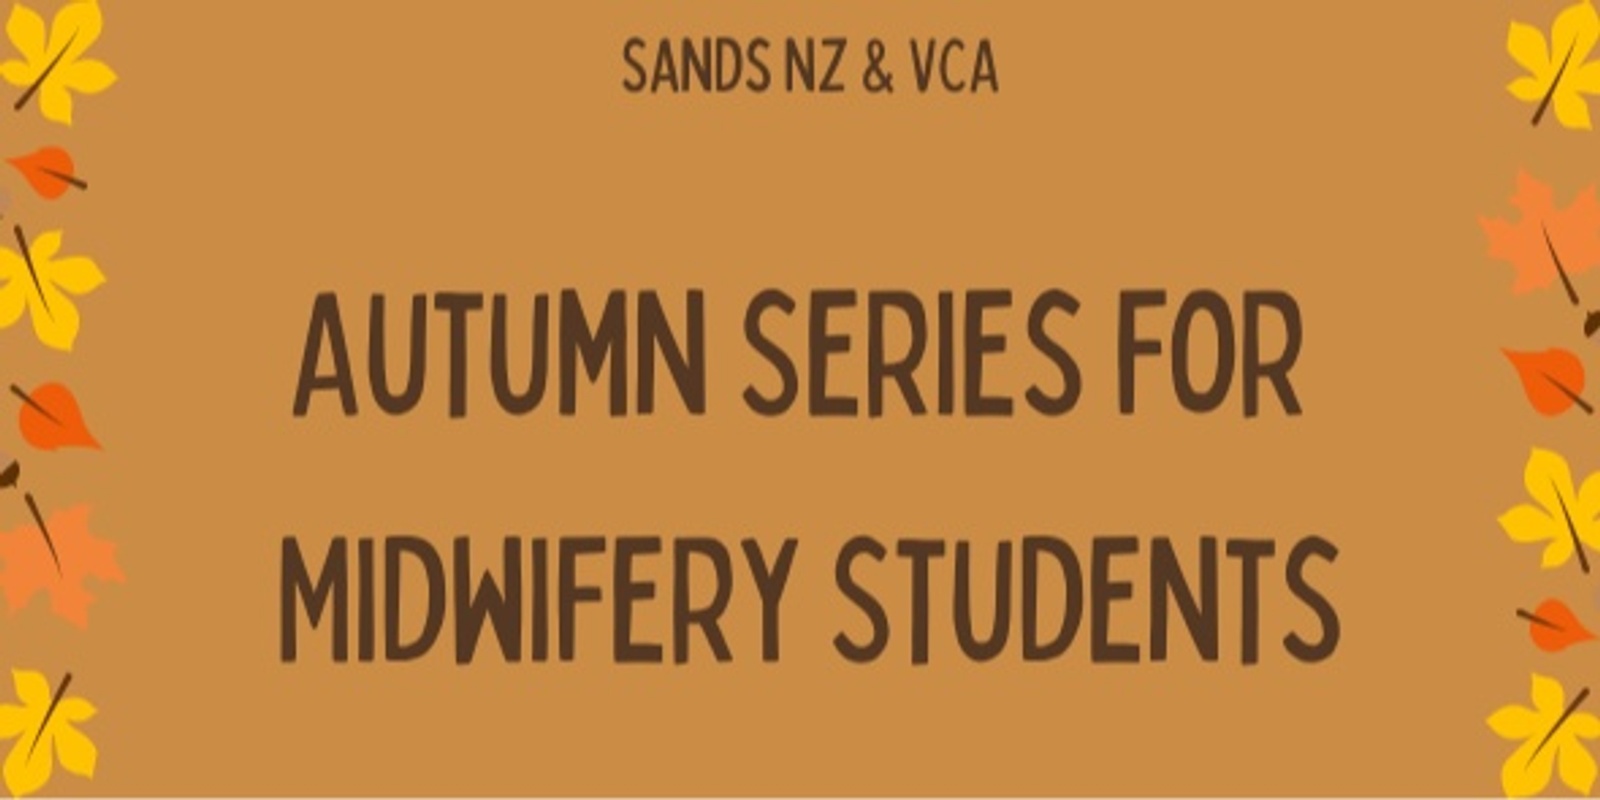 Banner image for Autumn Series for Midwifery Students 2022 (VCA & Sands NZ)